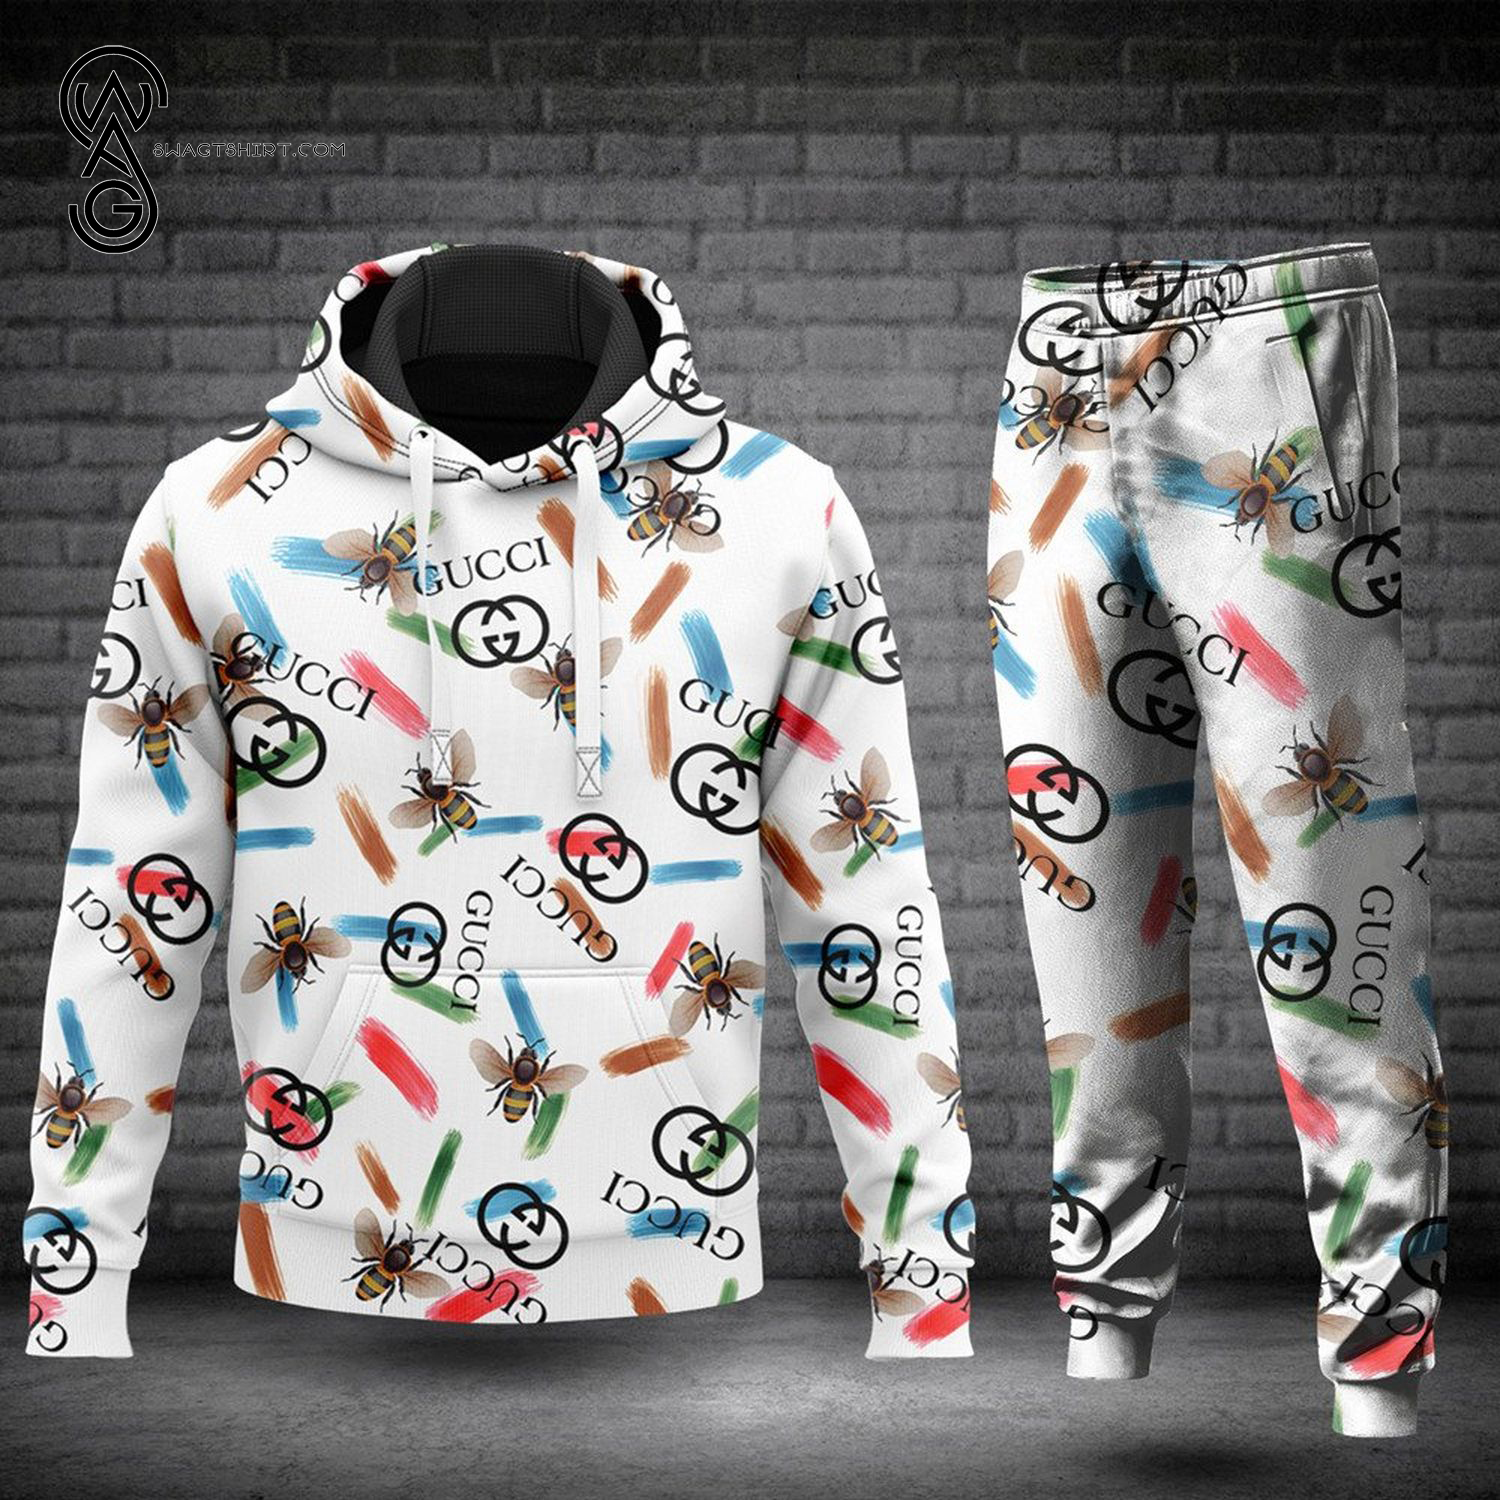 Gucci Bee Colorful Full Print Hoodie And Pants